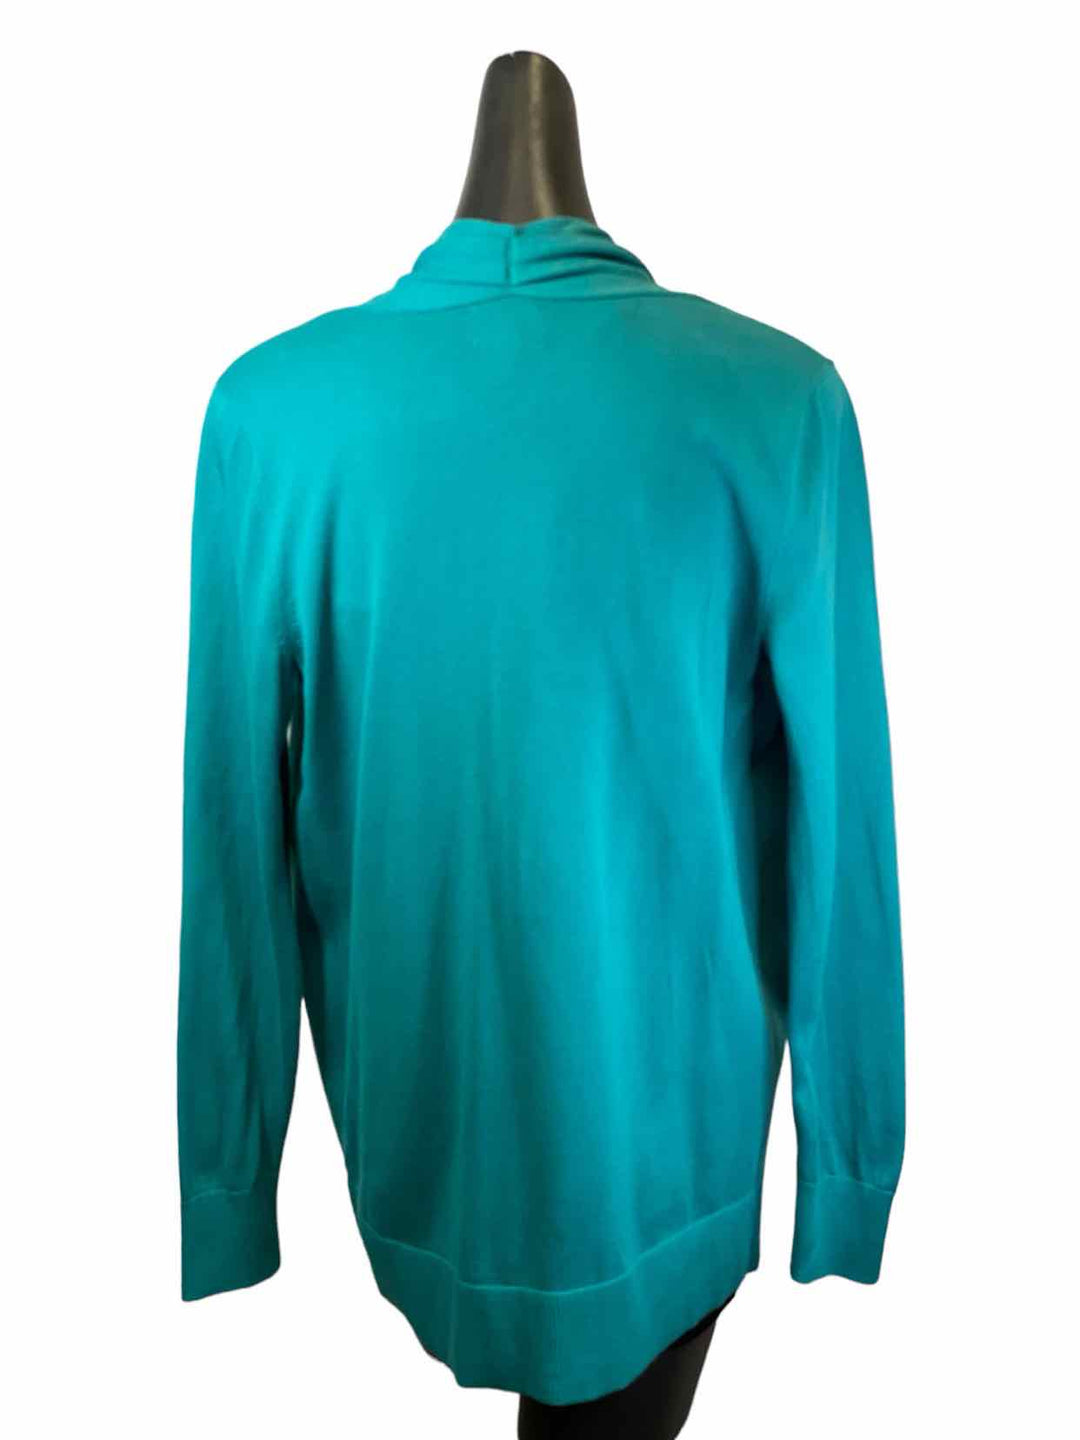 Lands End Size S Teal Sweater